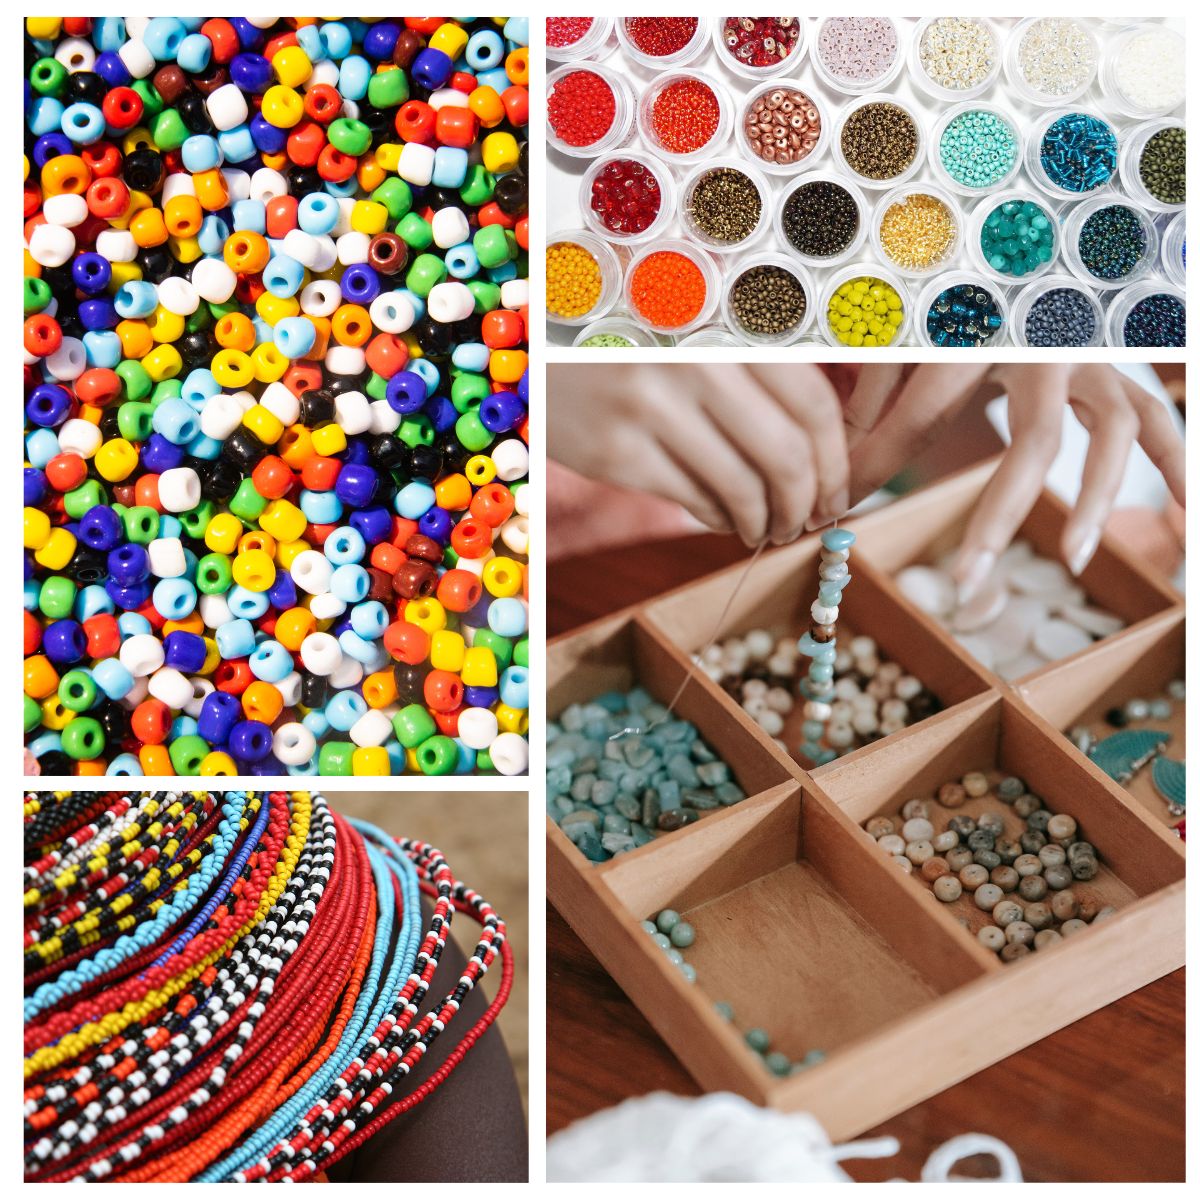 15 Fun DIY Bead Projects That You Can Make In An Afternoon - DIY